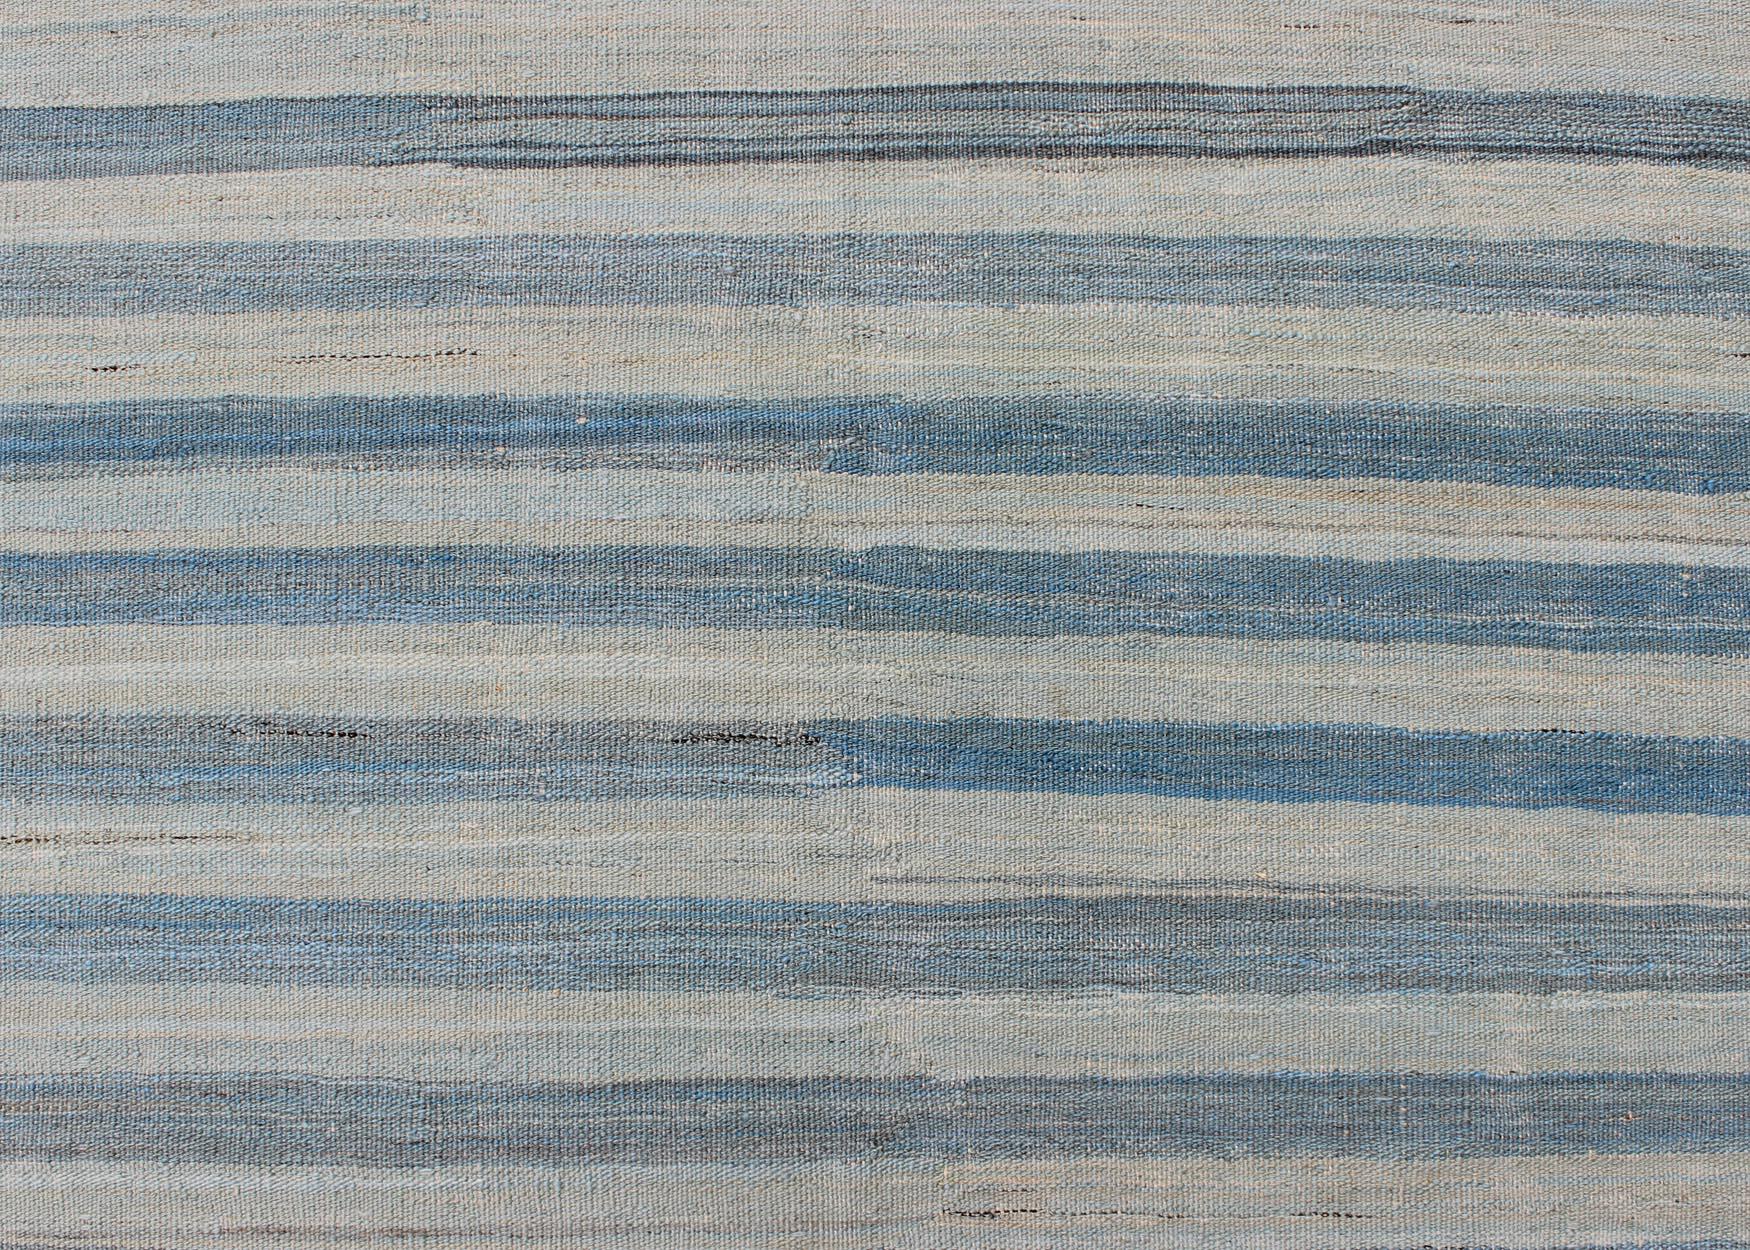 Contemporary Flat-Weave Modern Kilim Rug with Stripes in Shades of Blue, Taupe Gray and Ivory